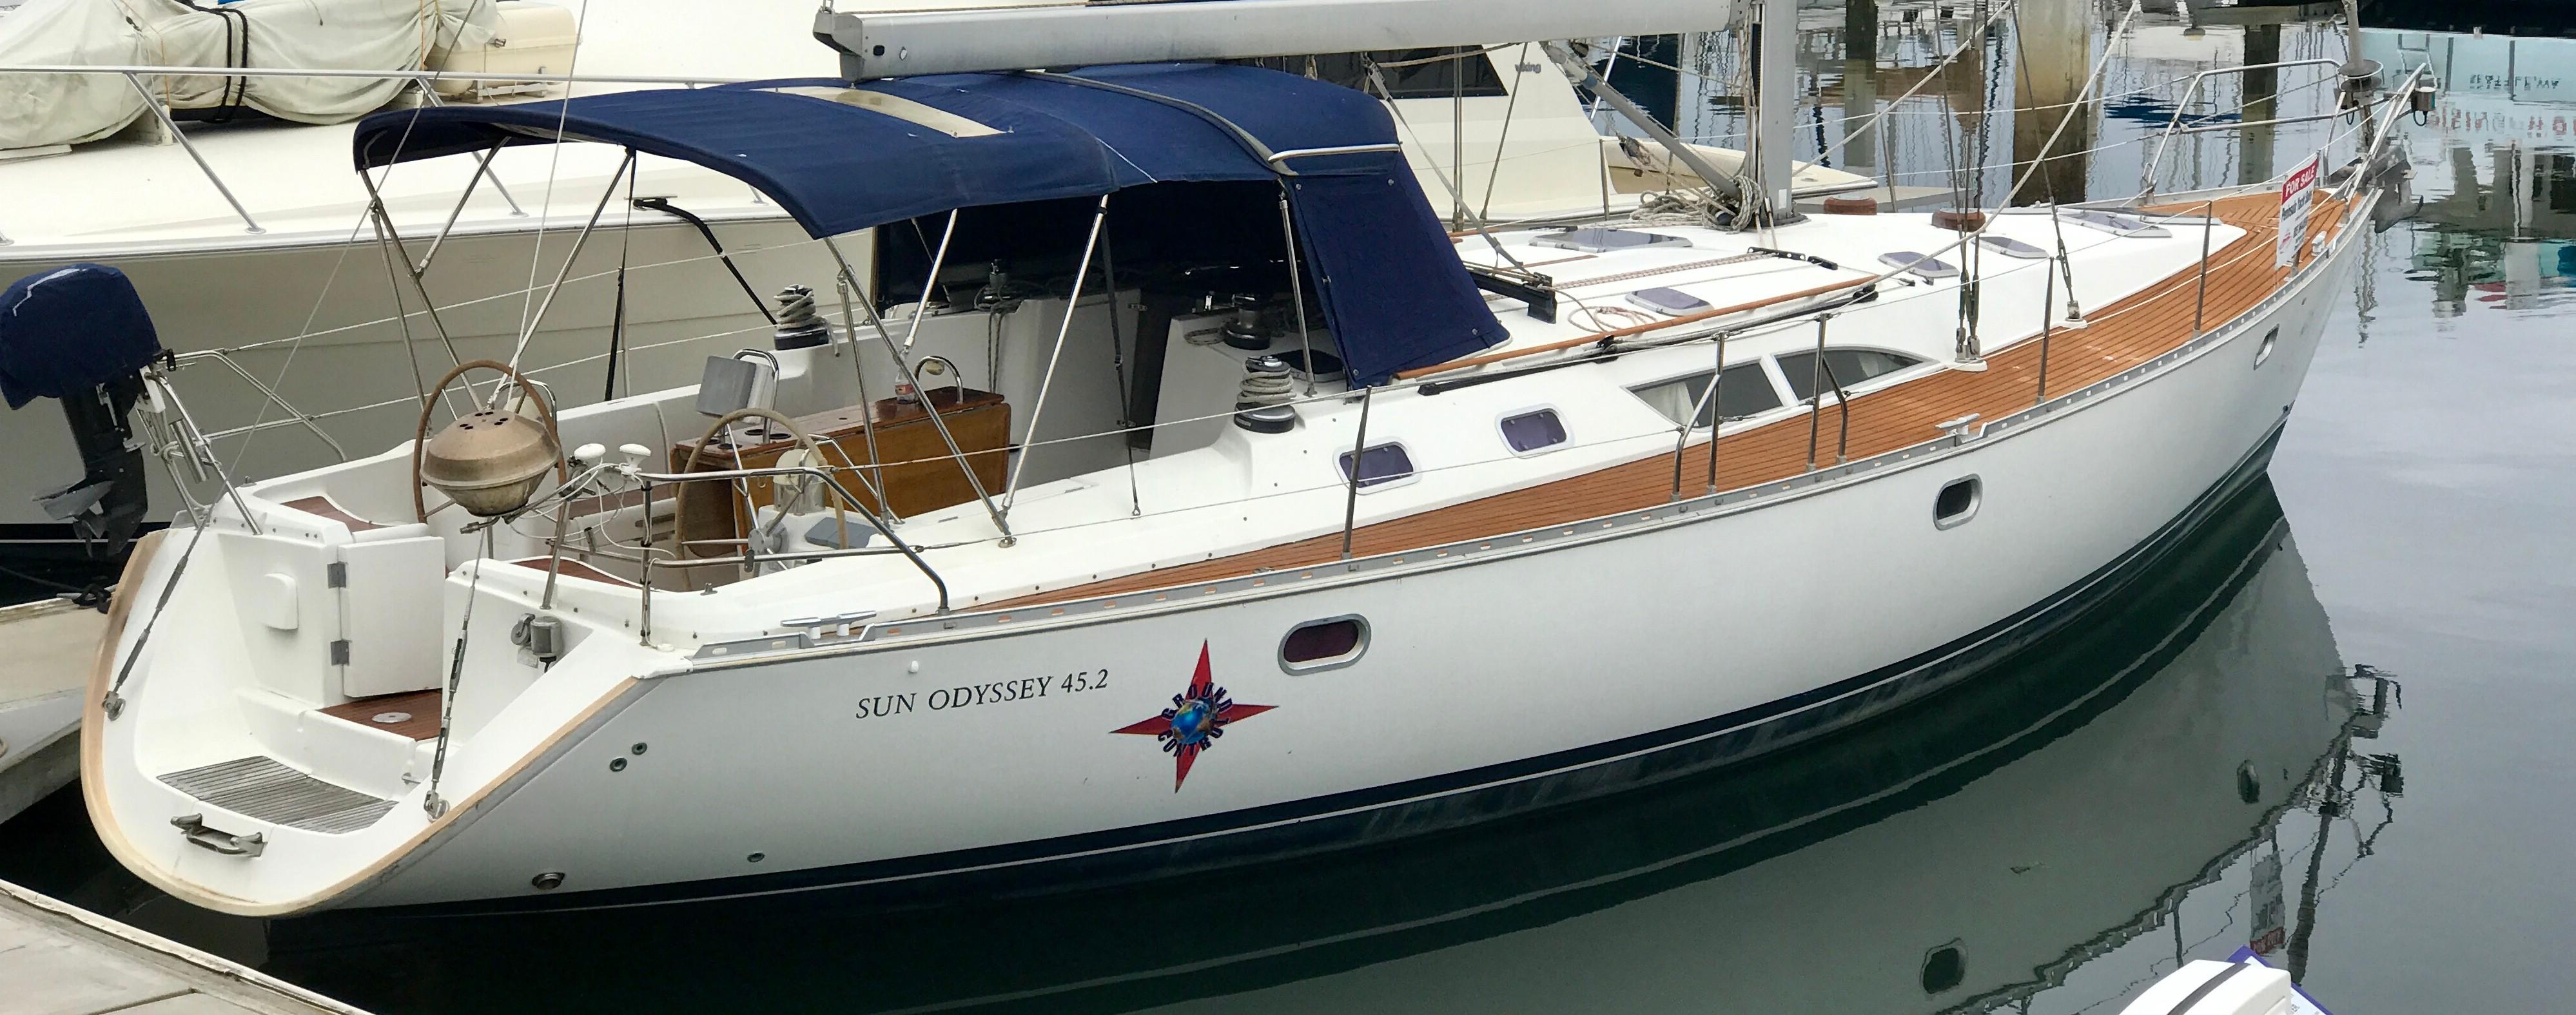 used jeanneau yachts for sale